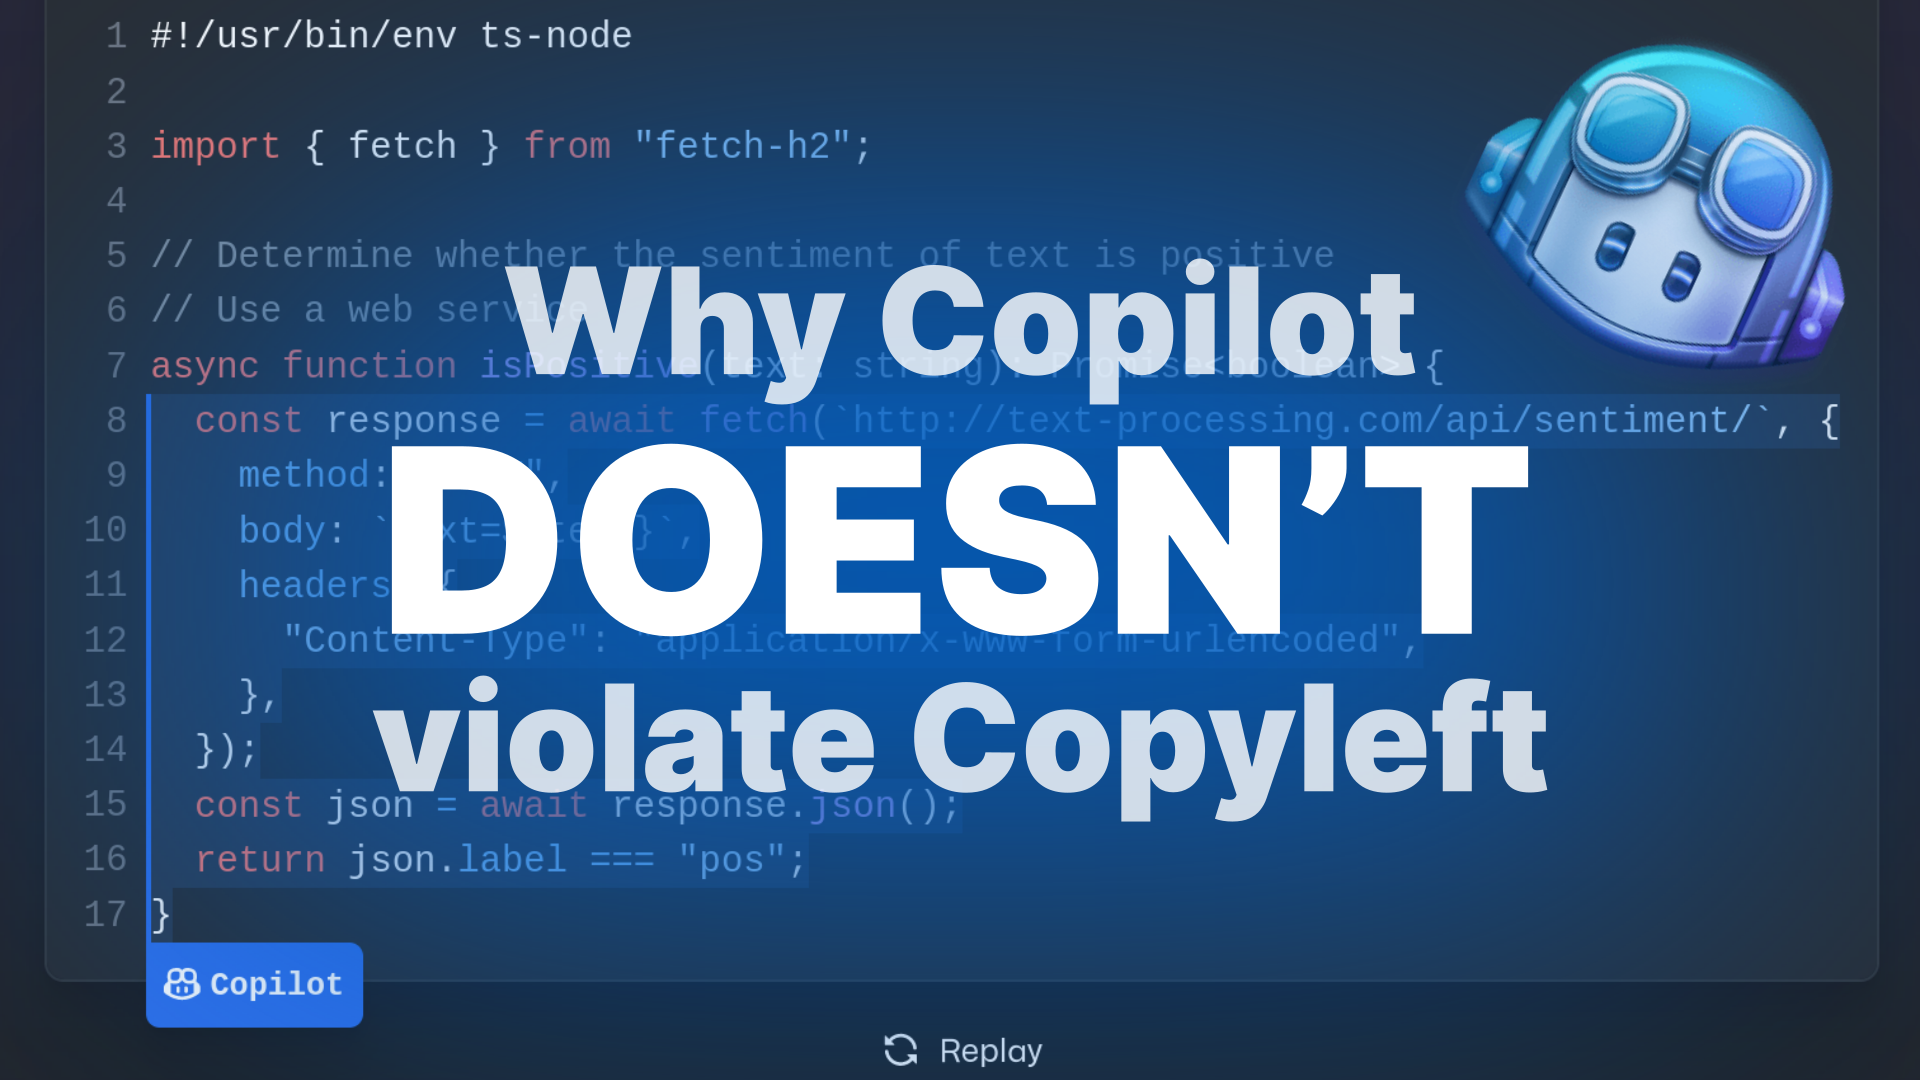 Thumbnail image with the title: “Why Copilot doesn't violate copyleft”. In the background, a screenshot of a code snippet suggested by GitHub Copilot.